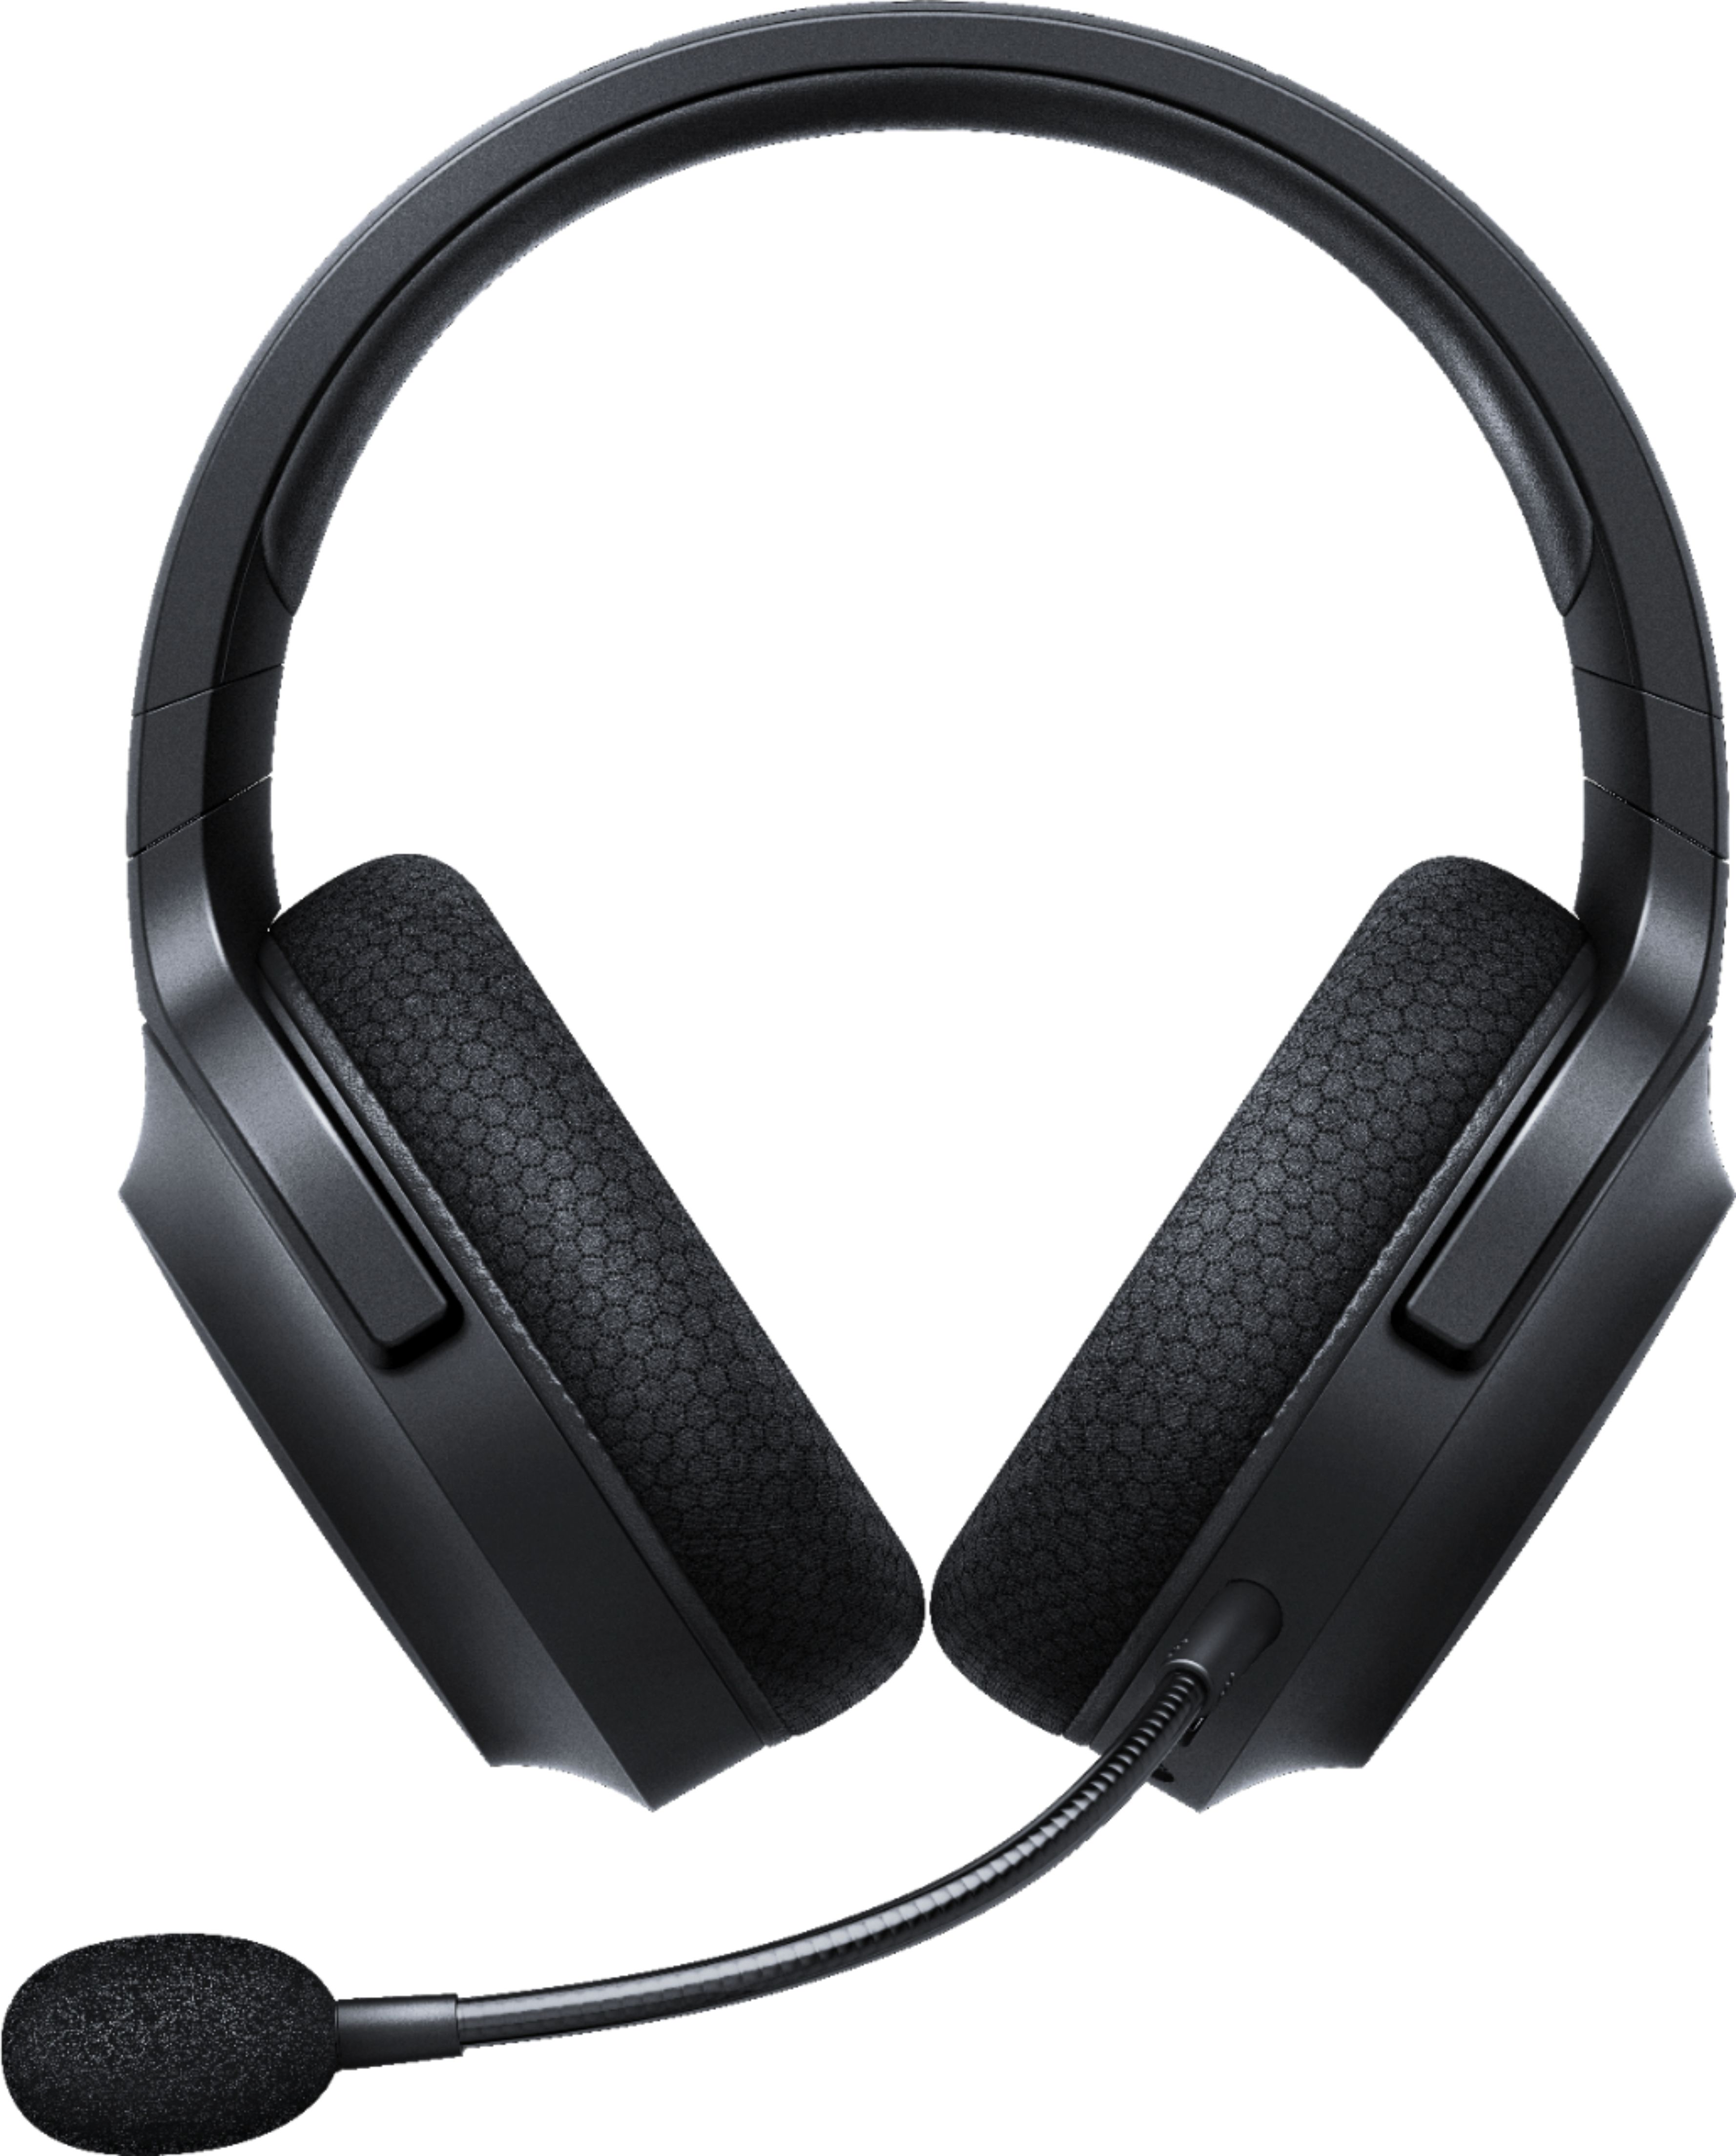 Angle View: Creative - Wired Over-the-head Gaming Headset - Black